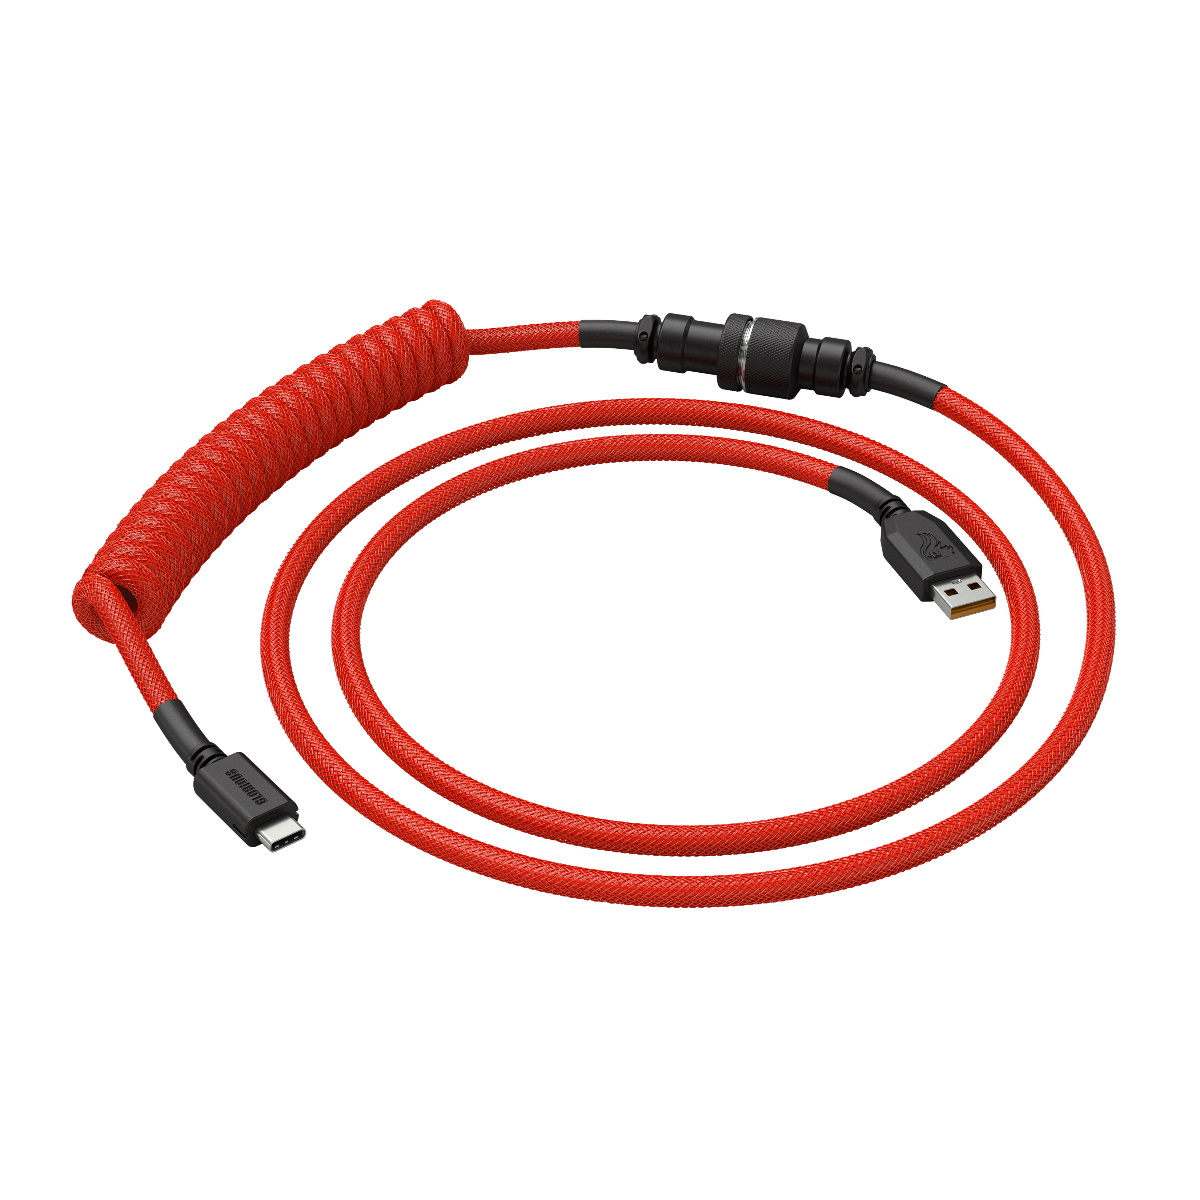 Glorious Coiled Cable USB-C to USB-A - Crimson Red (GLO-CBL-COIL-RED)